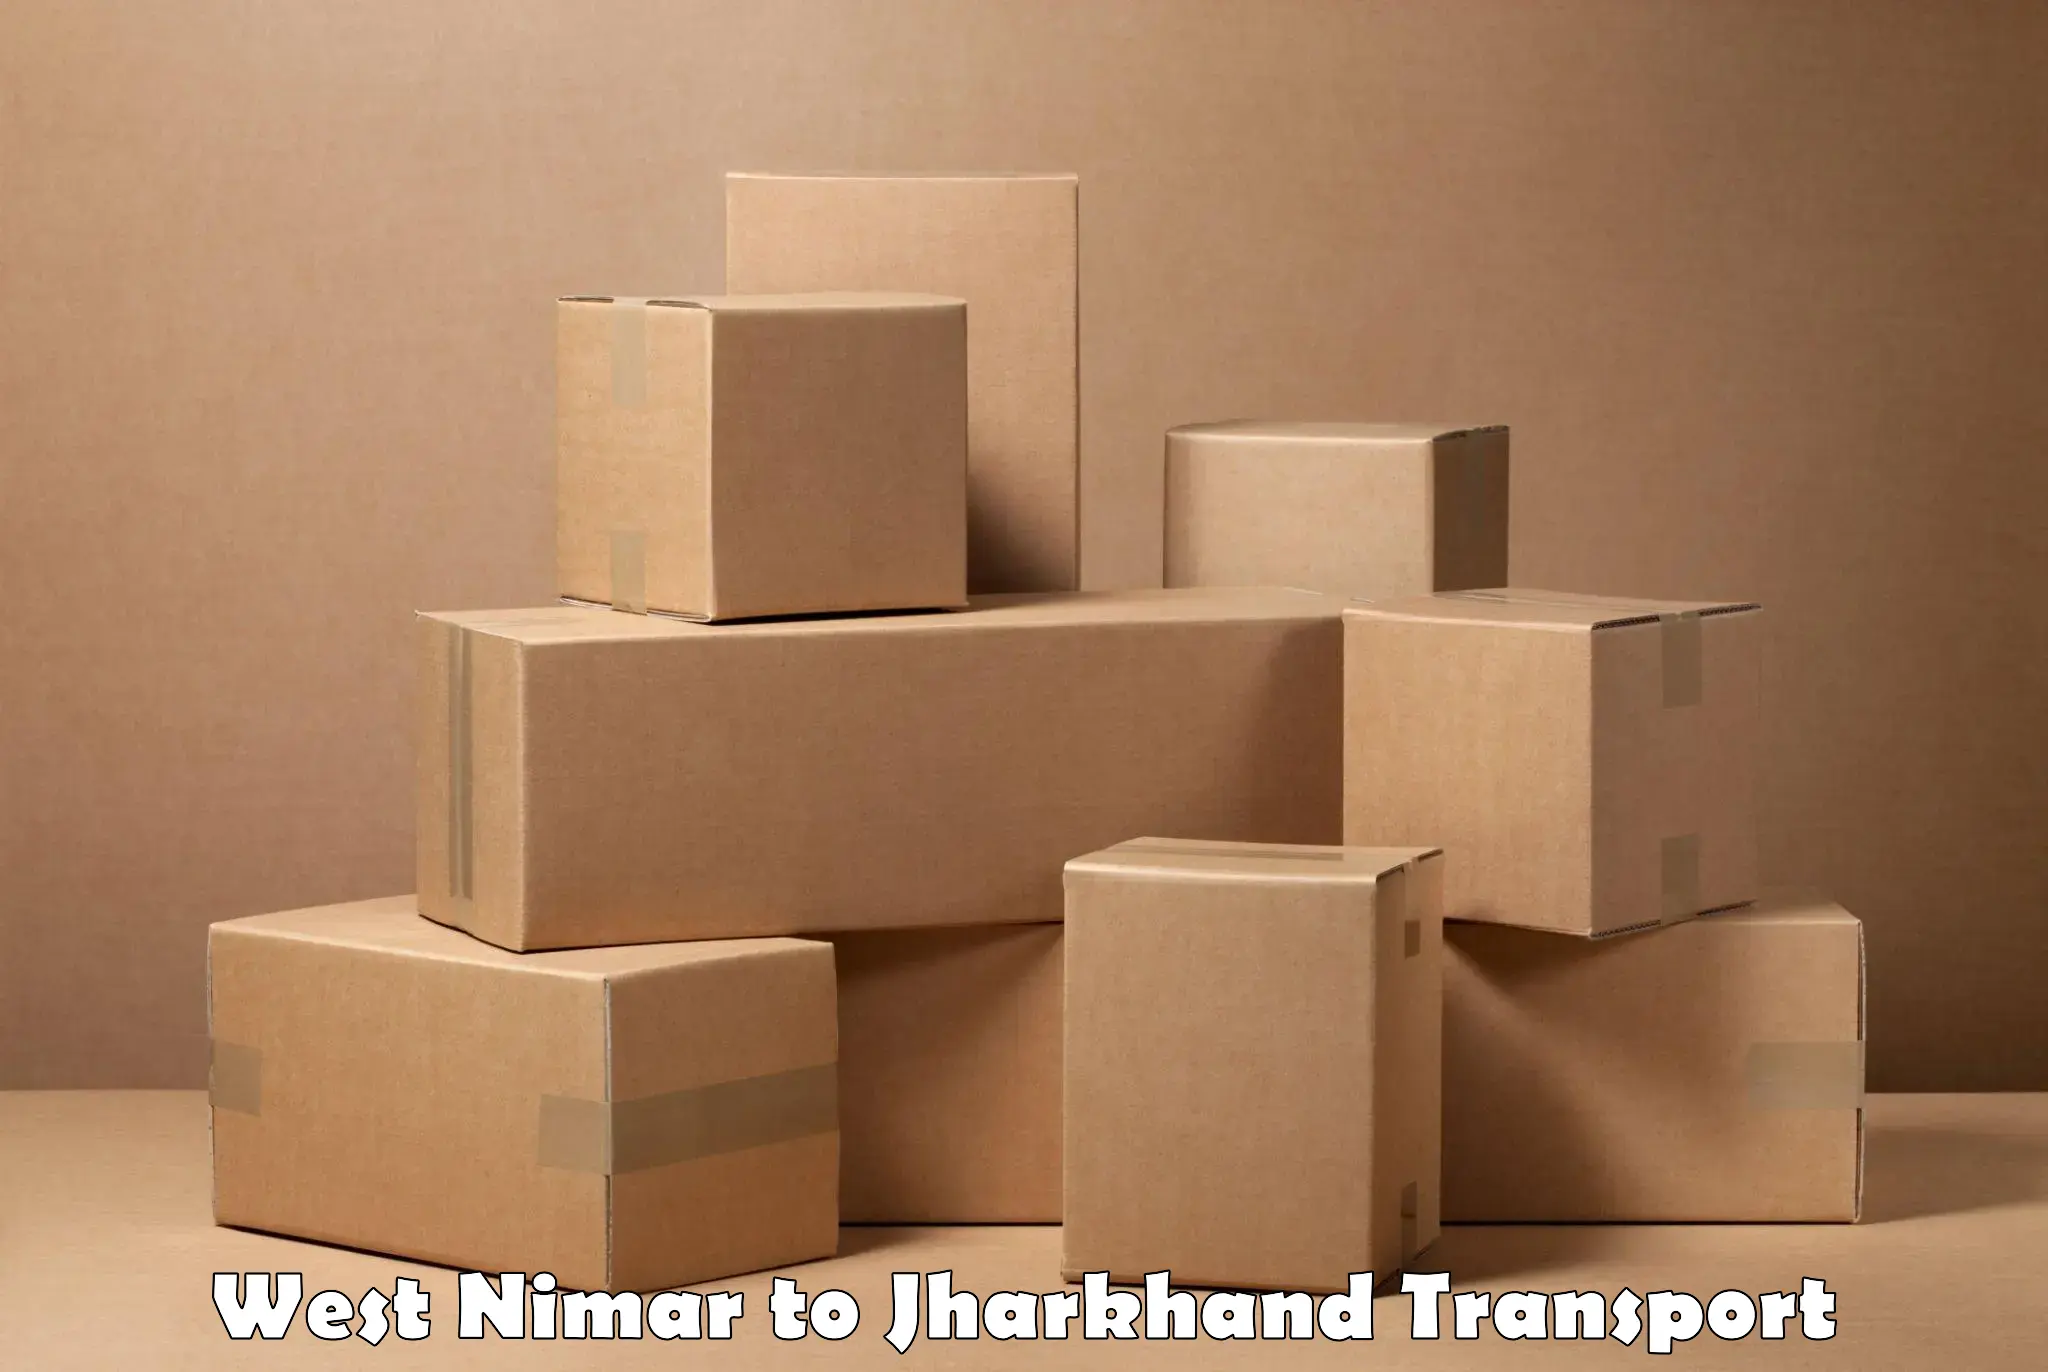 Container transport service West Nimar to Kedla